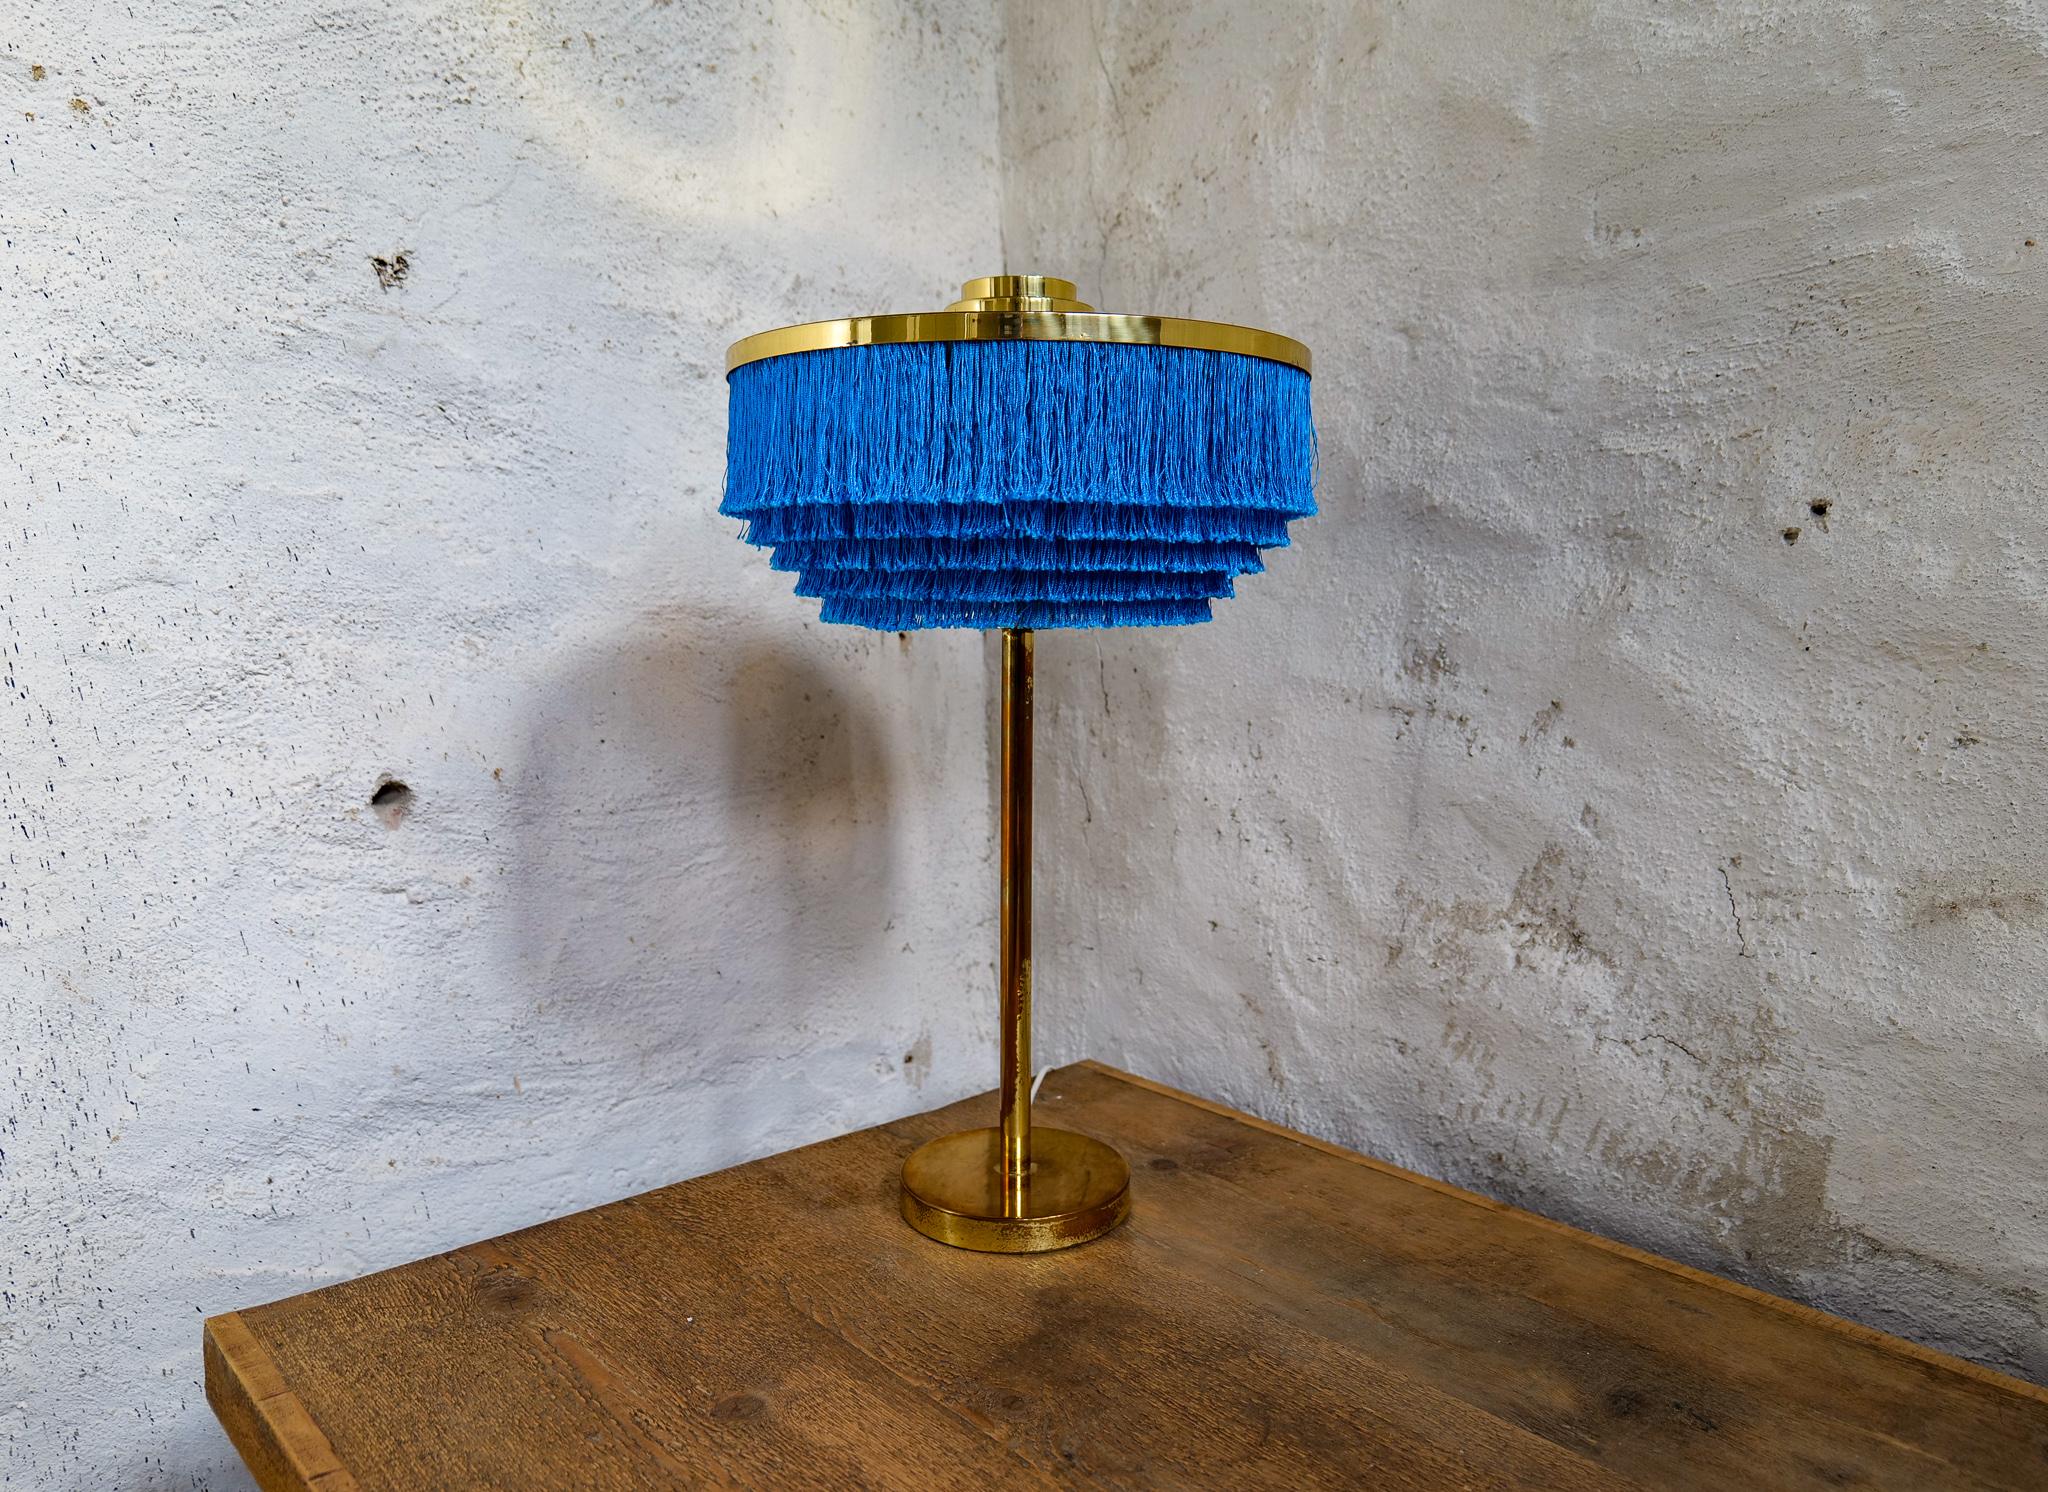 Rare table lamp model B-138 designed by Hans-Agne Jakobsson. Produced by Hans-Agne Jakobsson in Markaryd, Sweden.
This lamp is one of the rarest and most sought-after models in Hans-Agne’s fringe series.

Good vintage condition. The fringes are